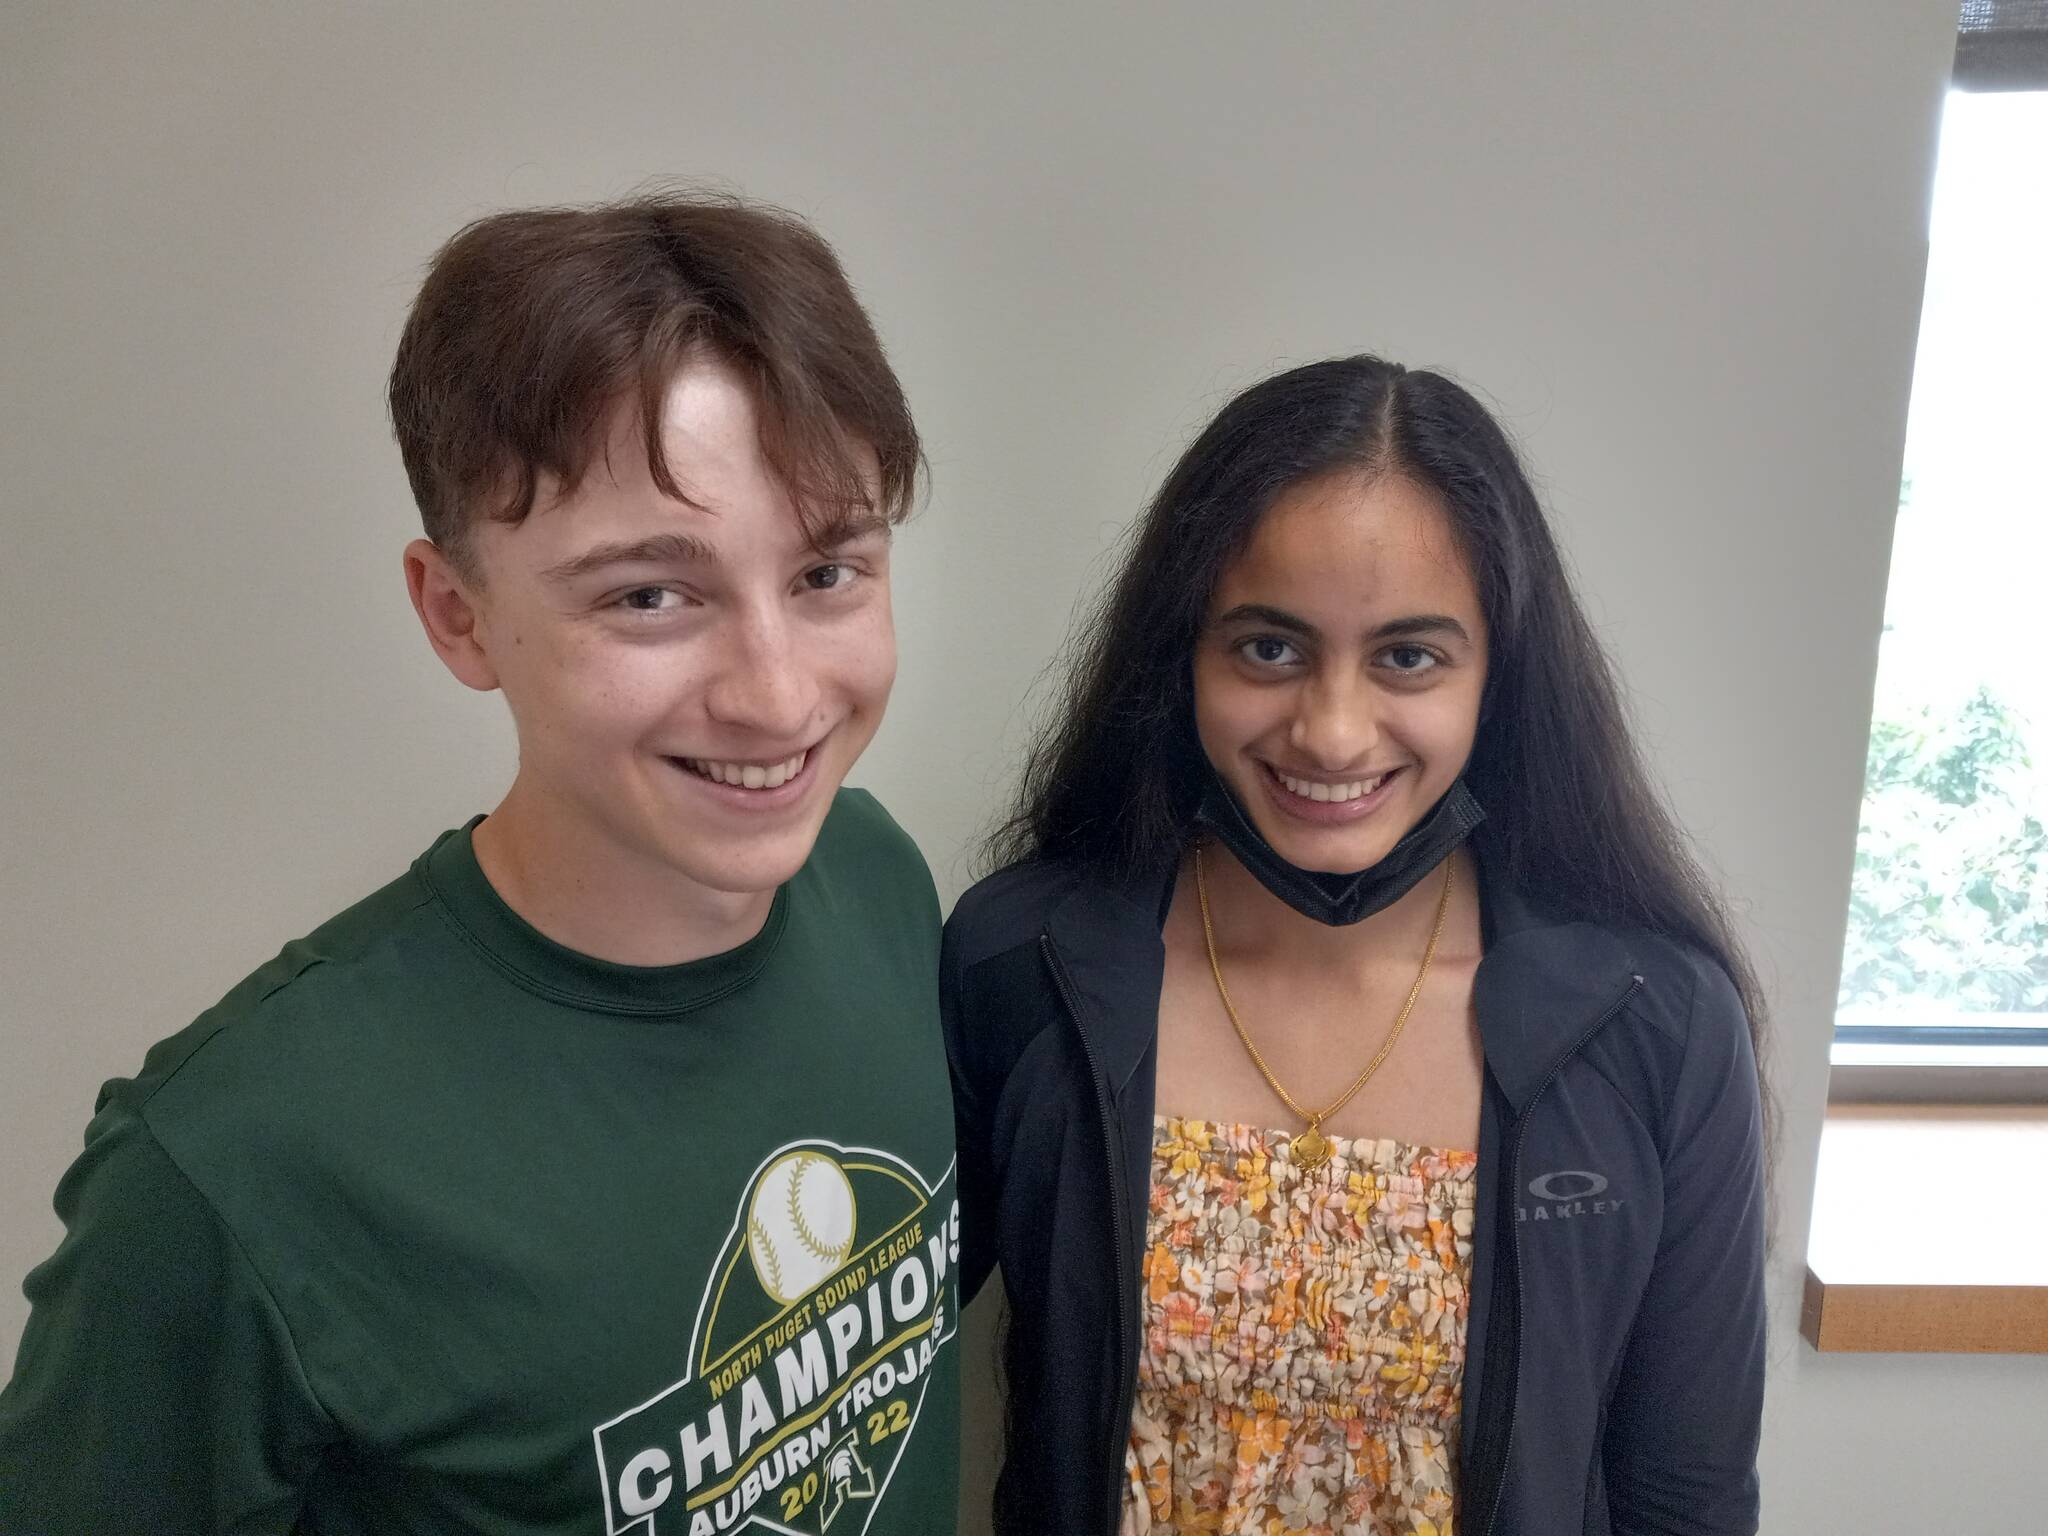 Ethan Smetheram, left, and Harjot Rai will graduate this weekend from Auburn High School, the first class since the pandemic hit in 2020 to enjoy a full school year’s worth of activities at their actual school. (Photo by Robert Whale/ Auburn Reporter)